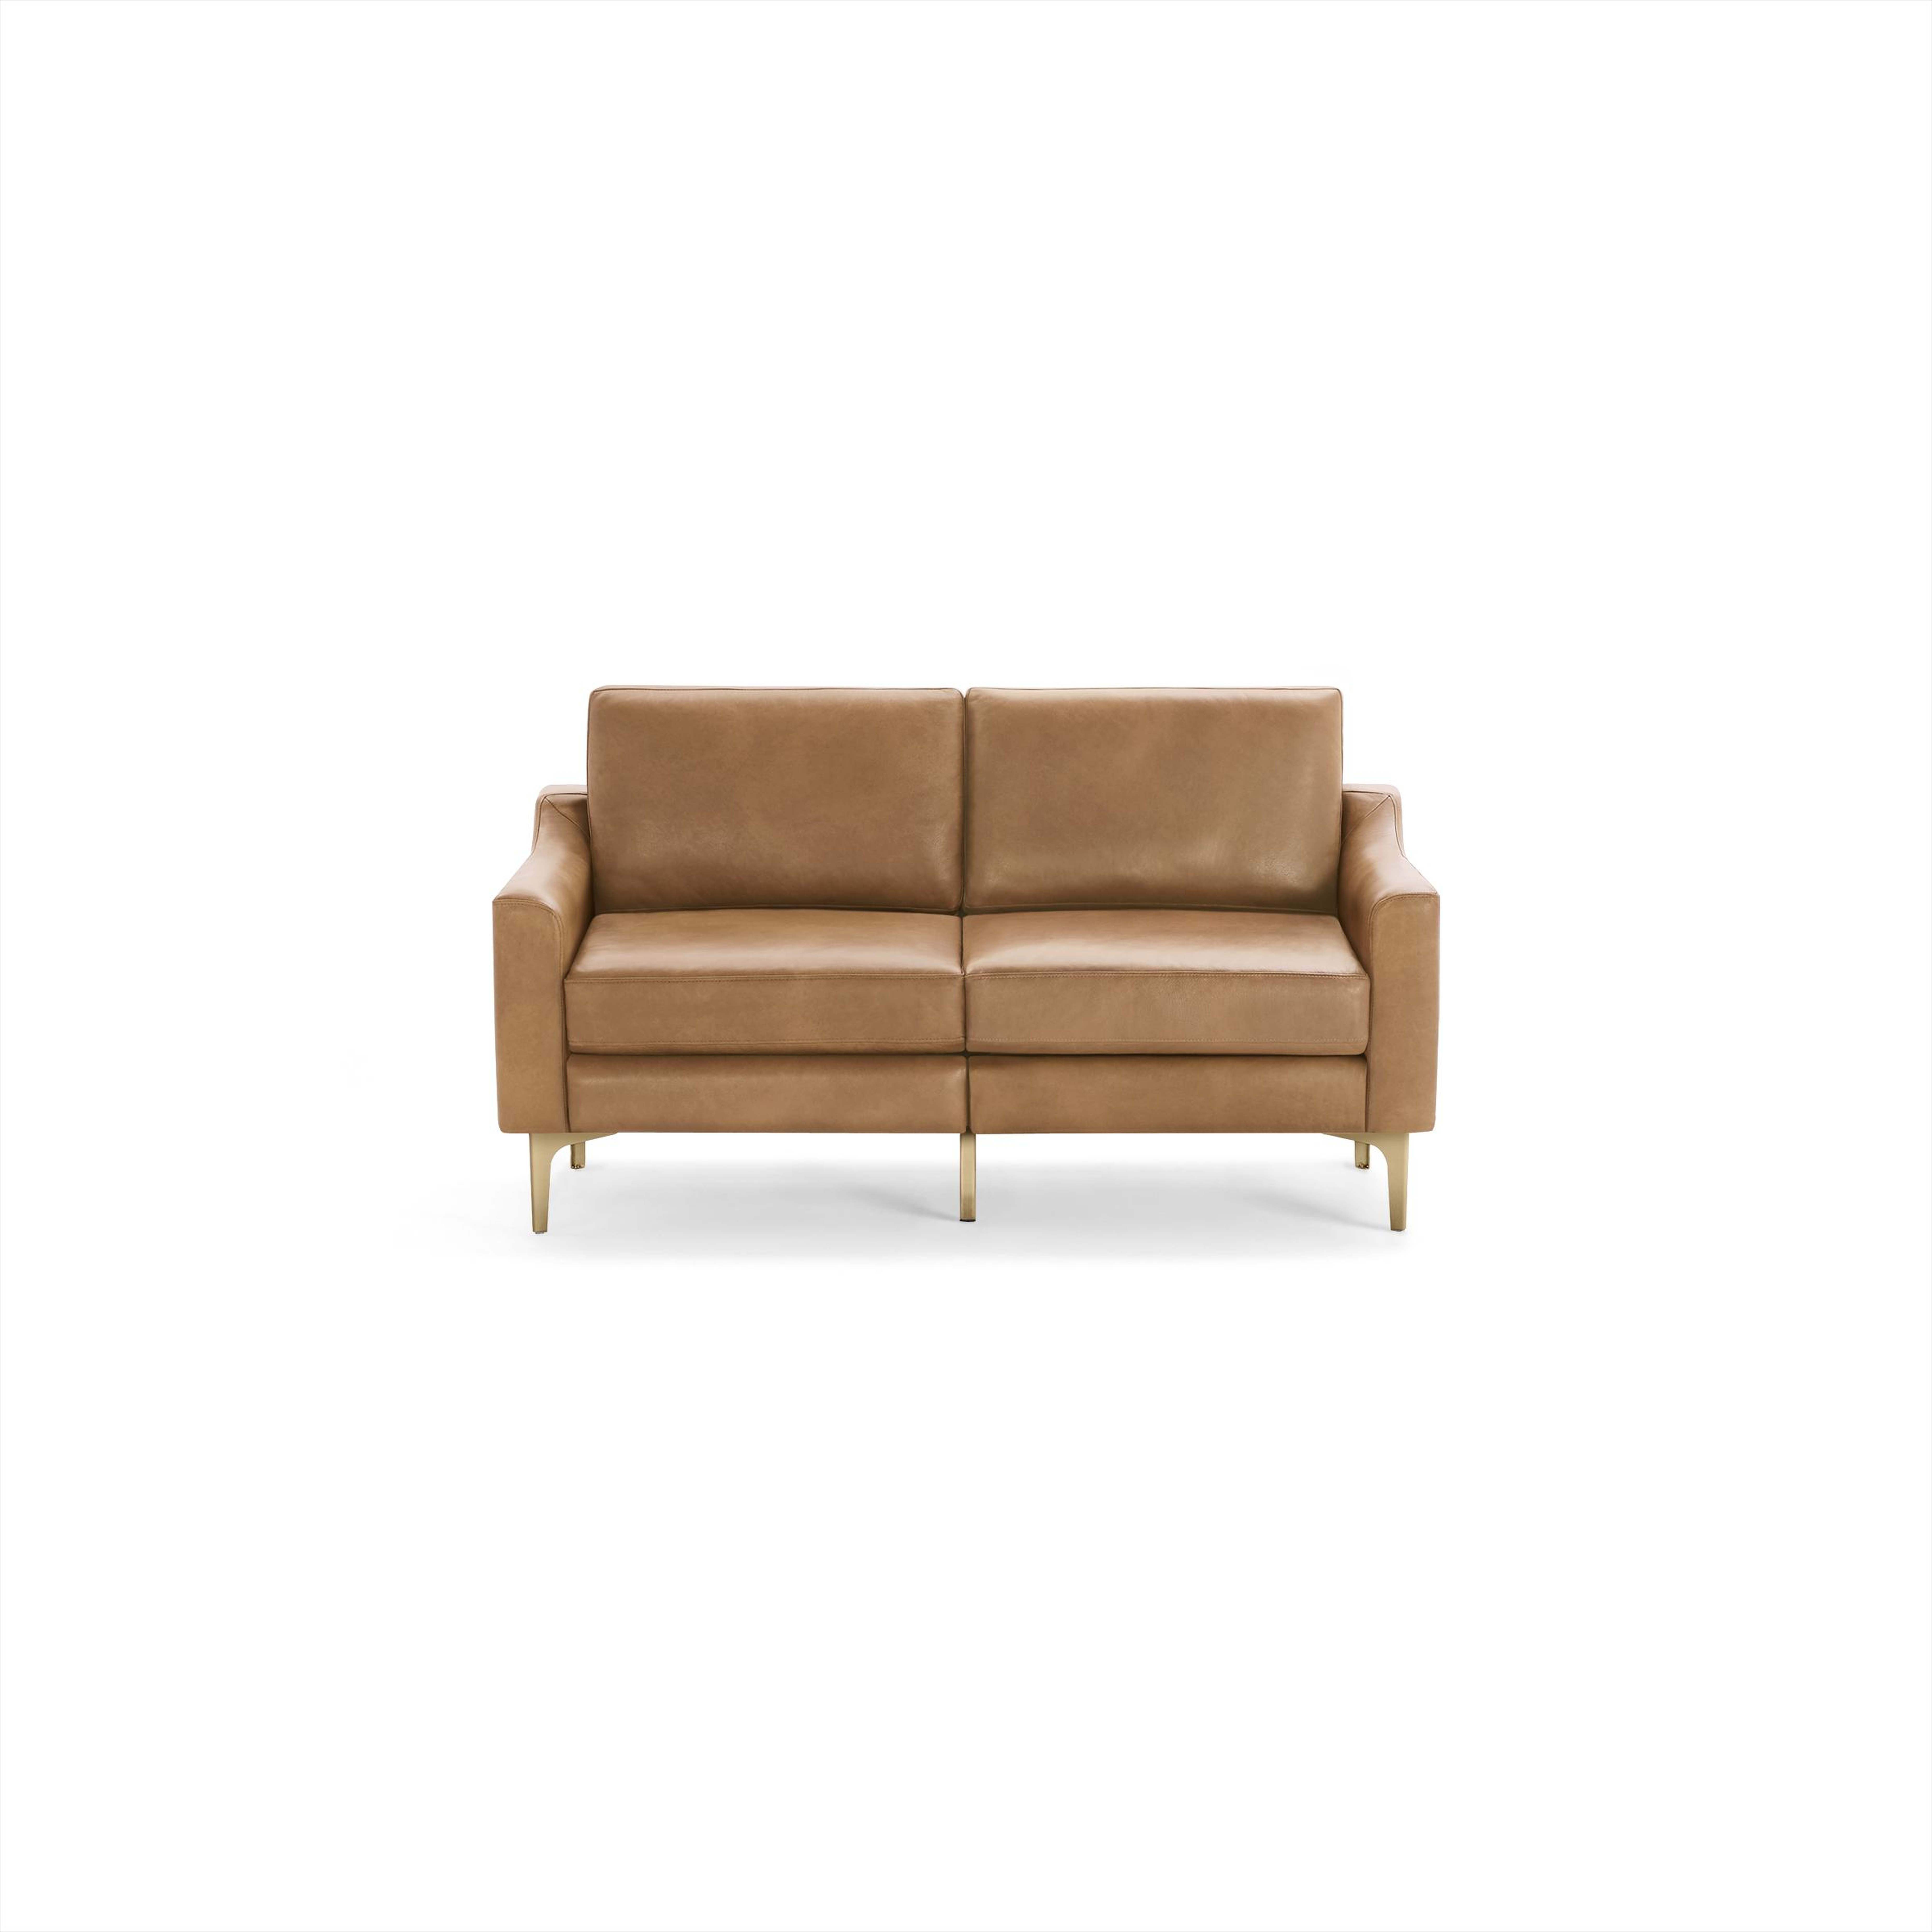 Nomad Leather Loveseat in Camel, Brass Legs - Burrow